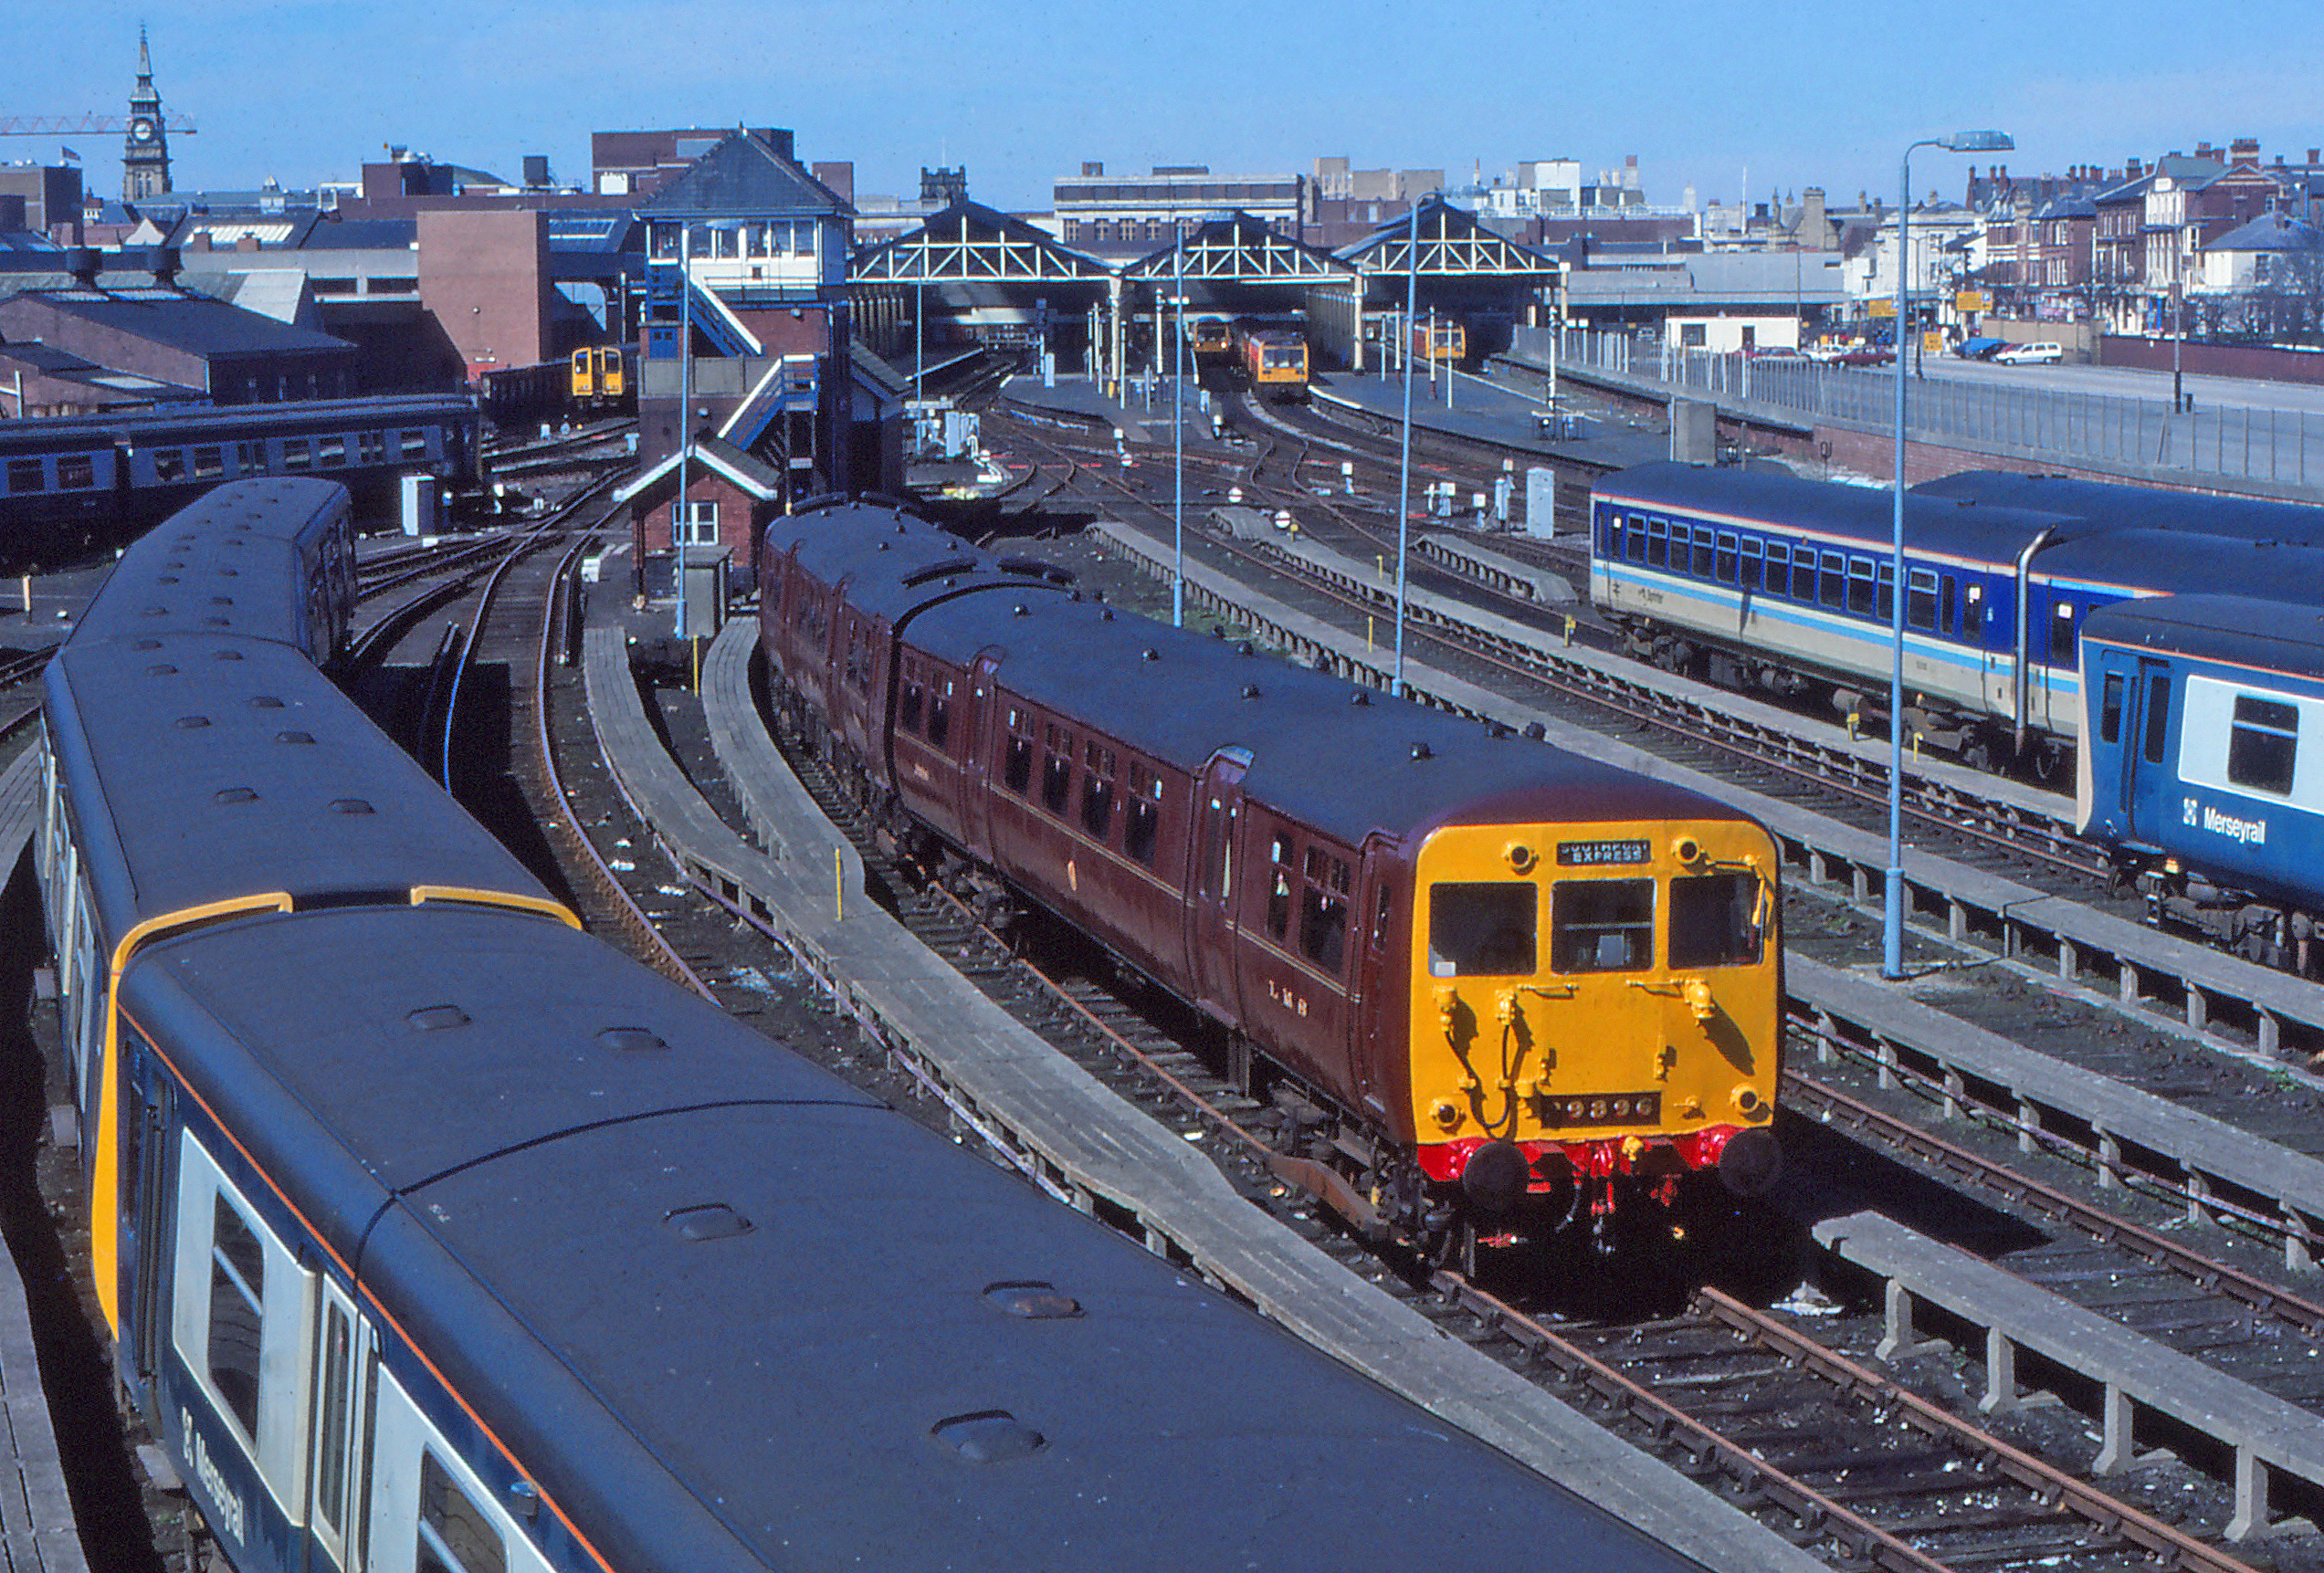 The sole-surviving Class 502 electric multiple unit (EMU), that between 1940 and 1980 worked between Southport, Liverpool Exchange and Ormskirk. The train is pictured just outside Southport Railway Station. 